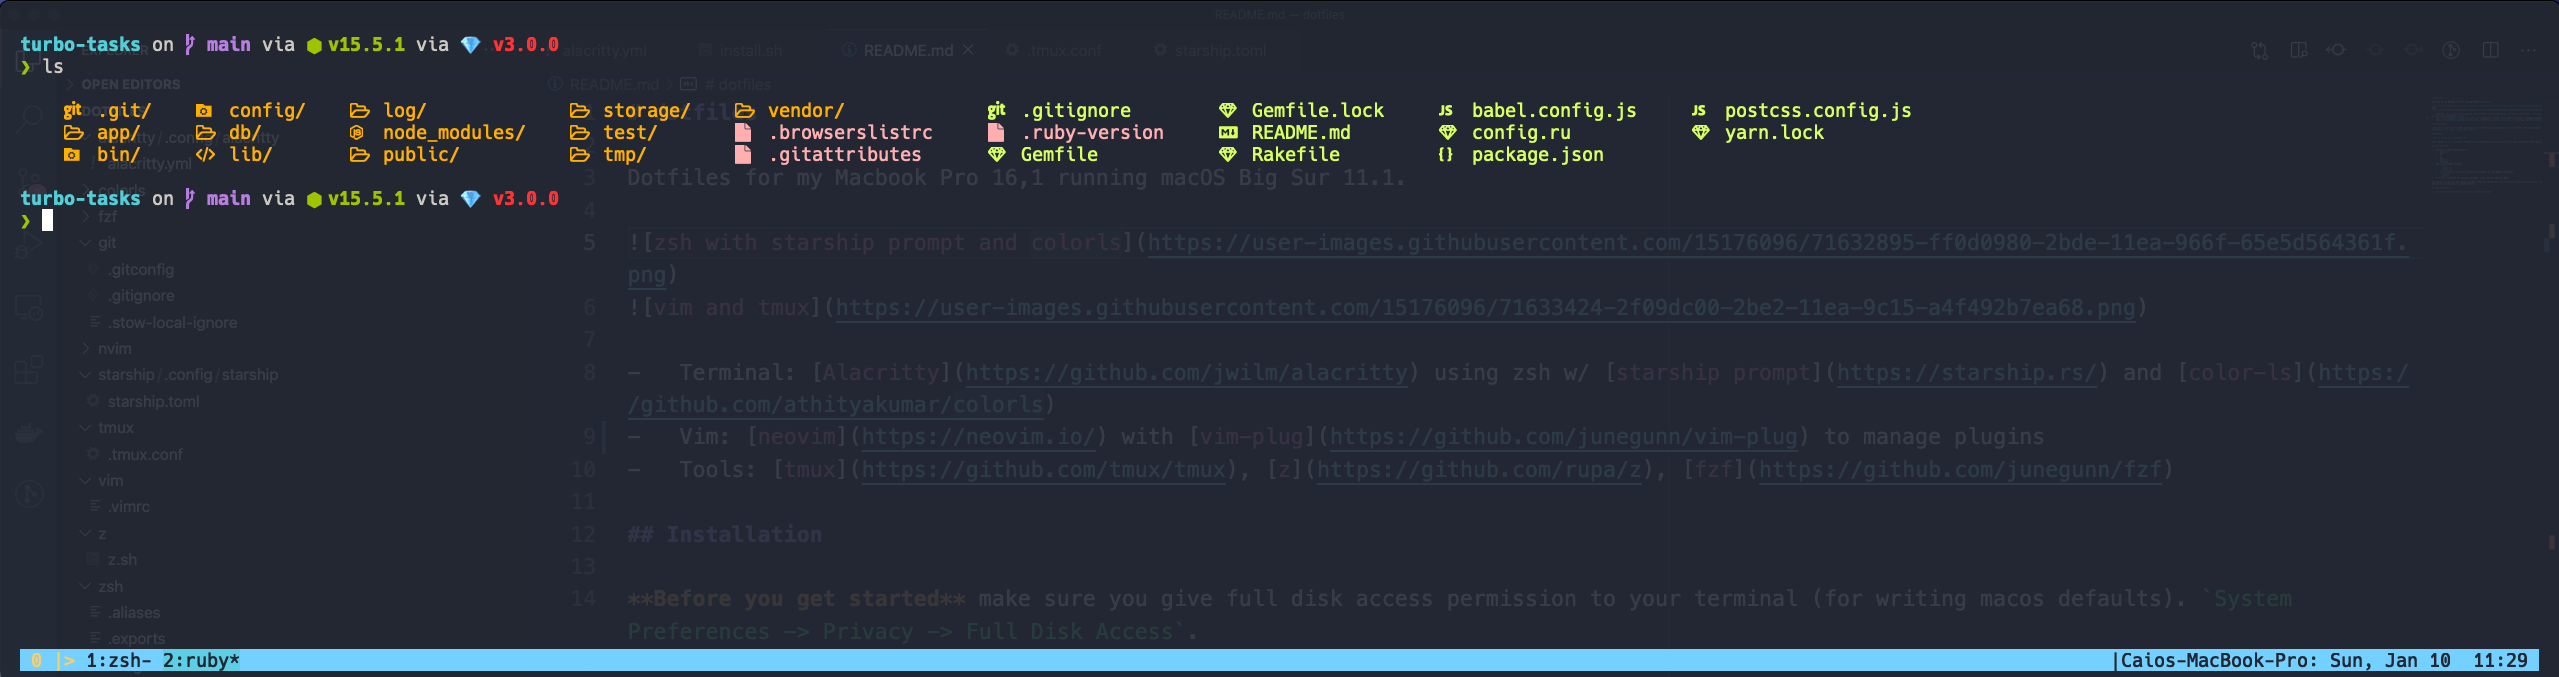 alacritty with zsh, tmux, starship prompt